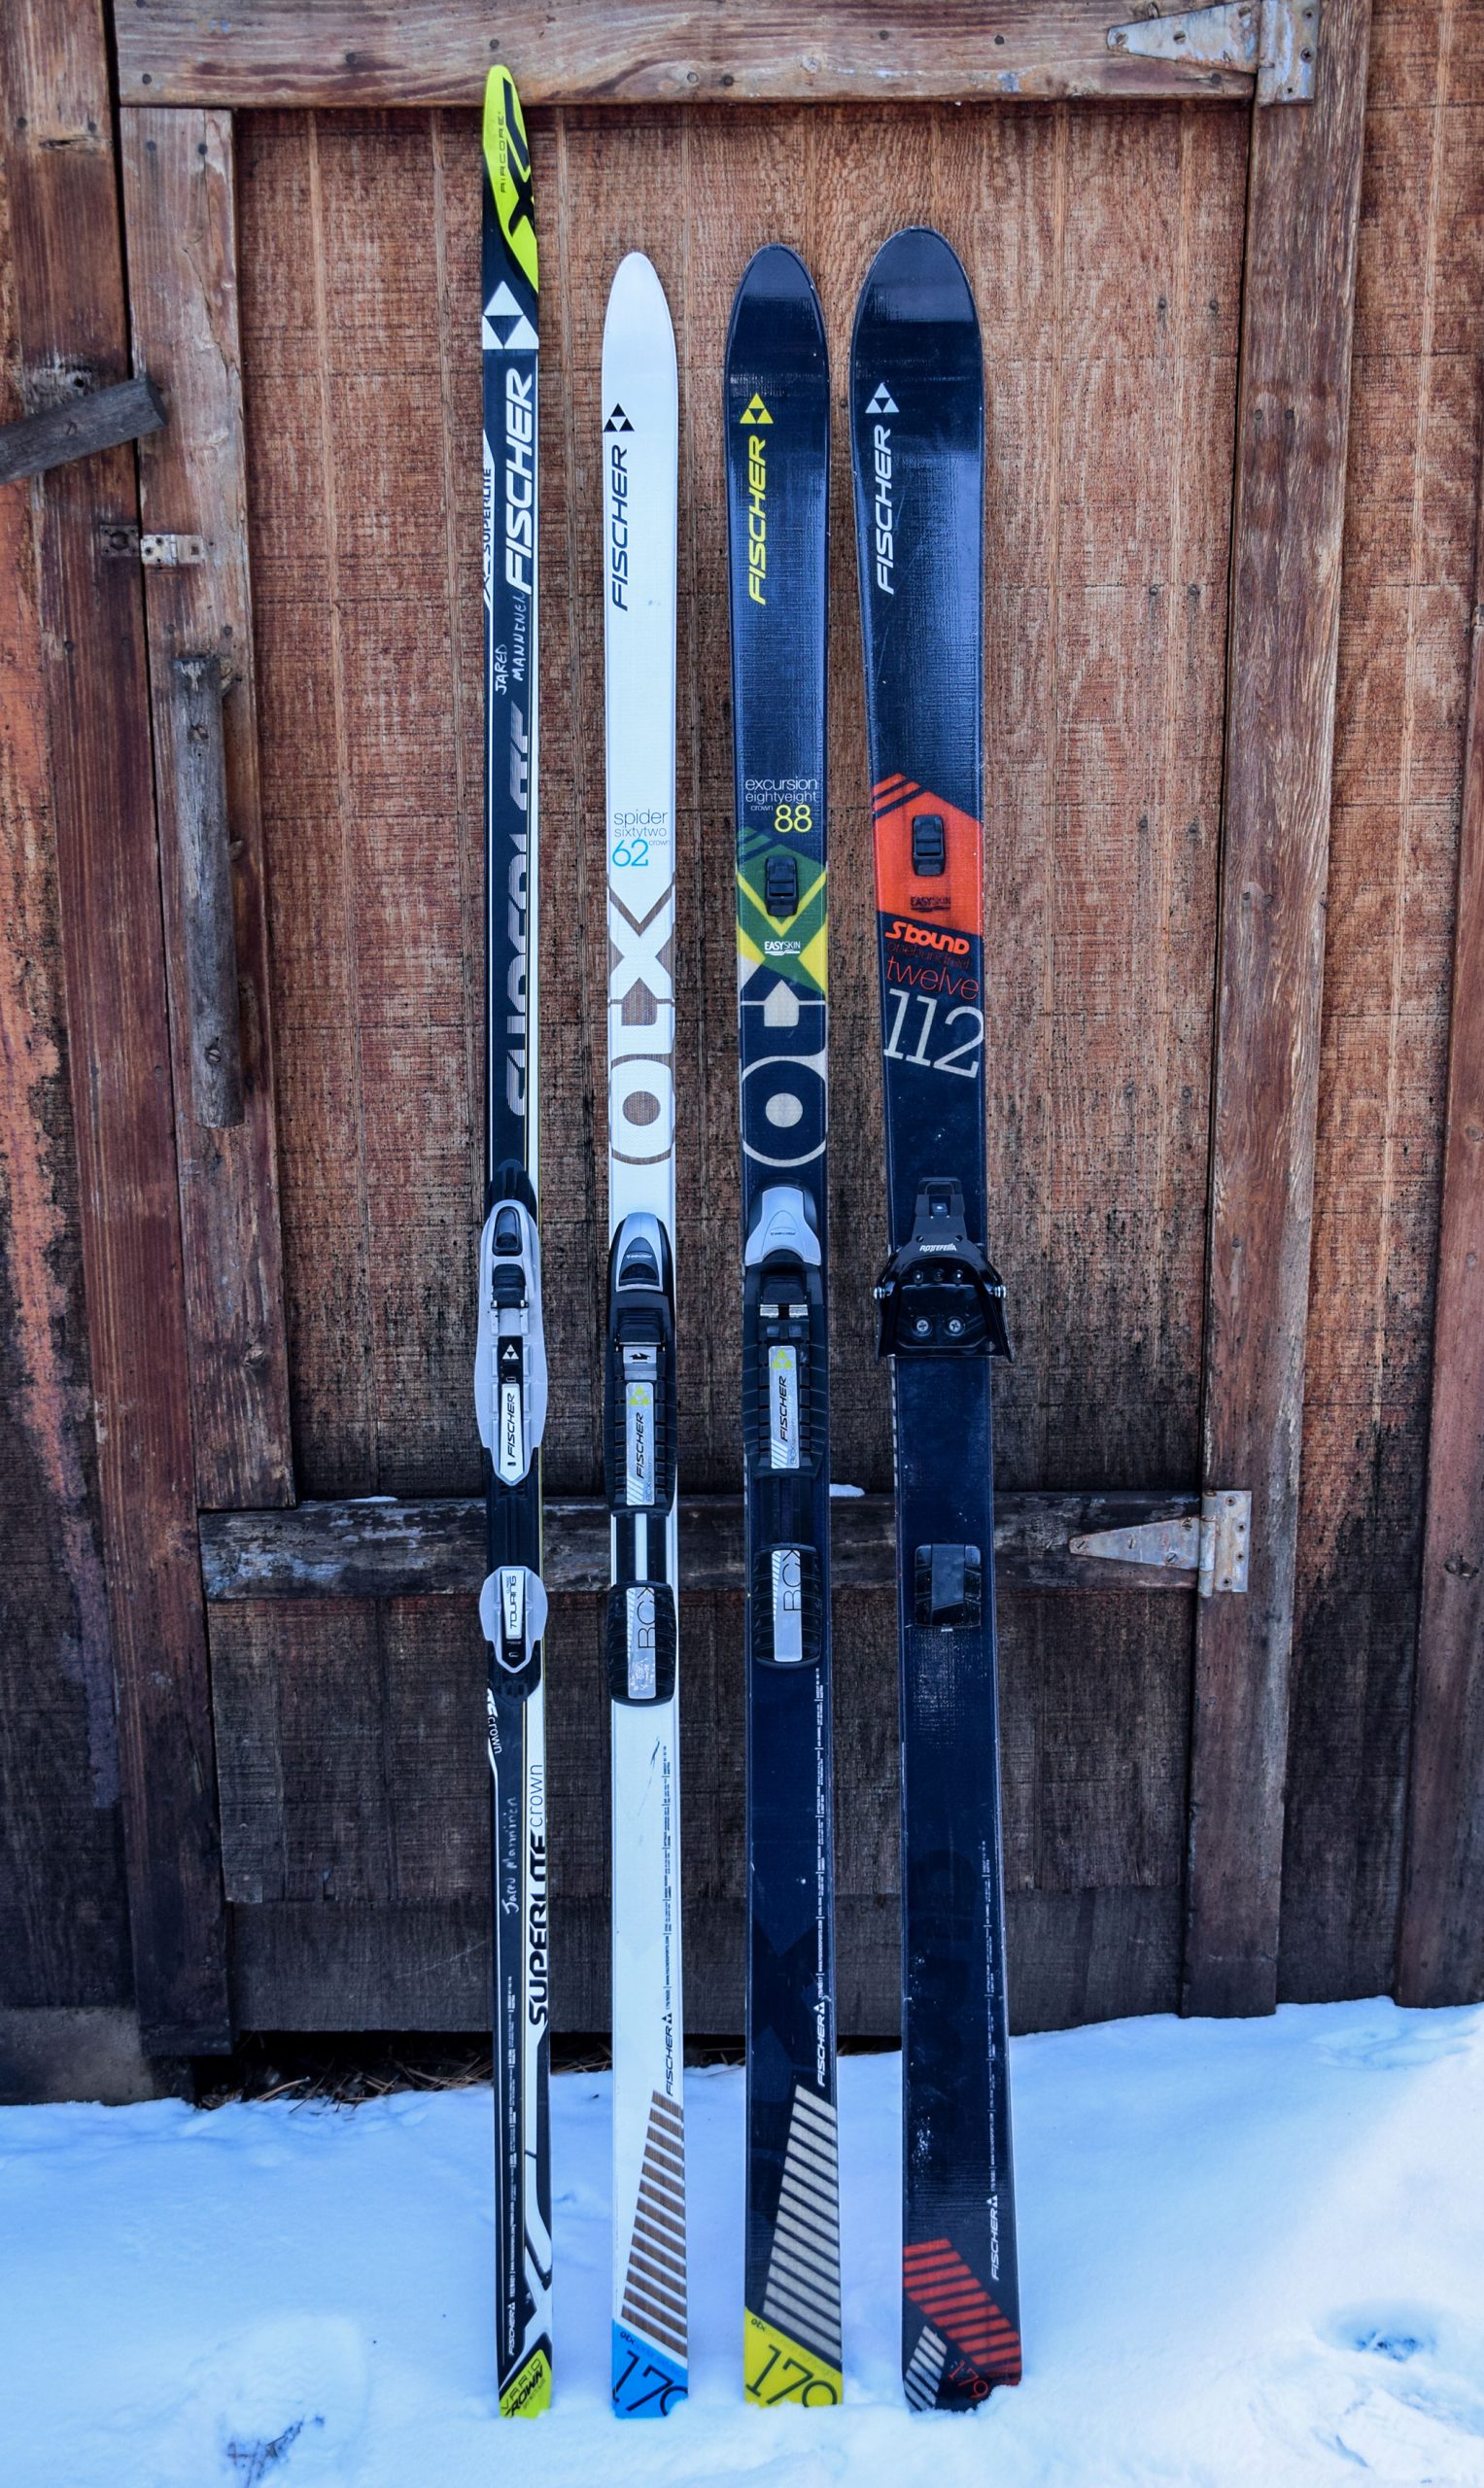 Different styles of classic cross-country skis.